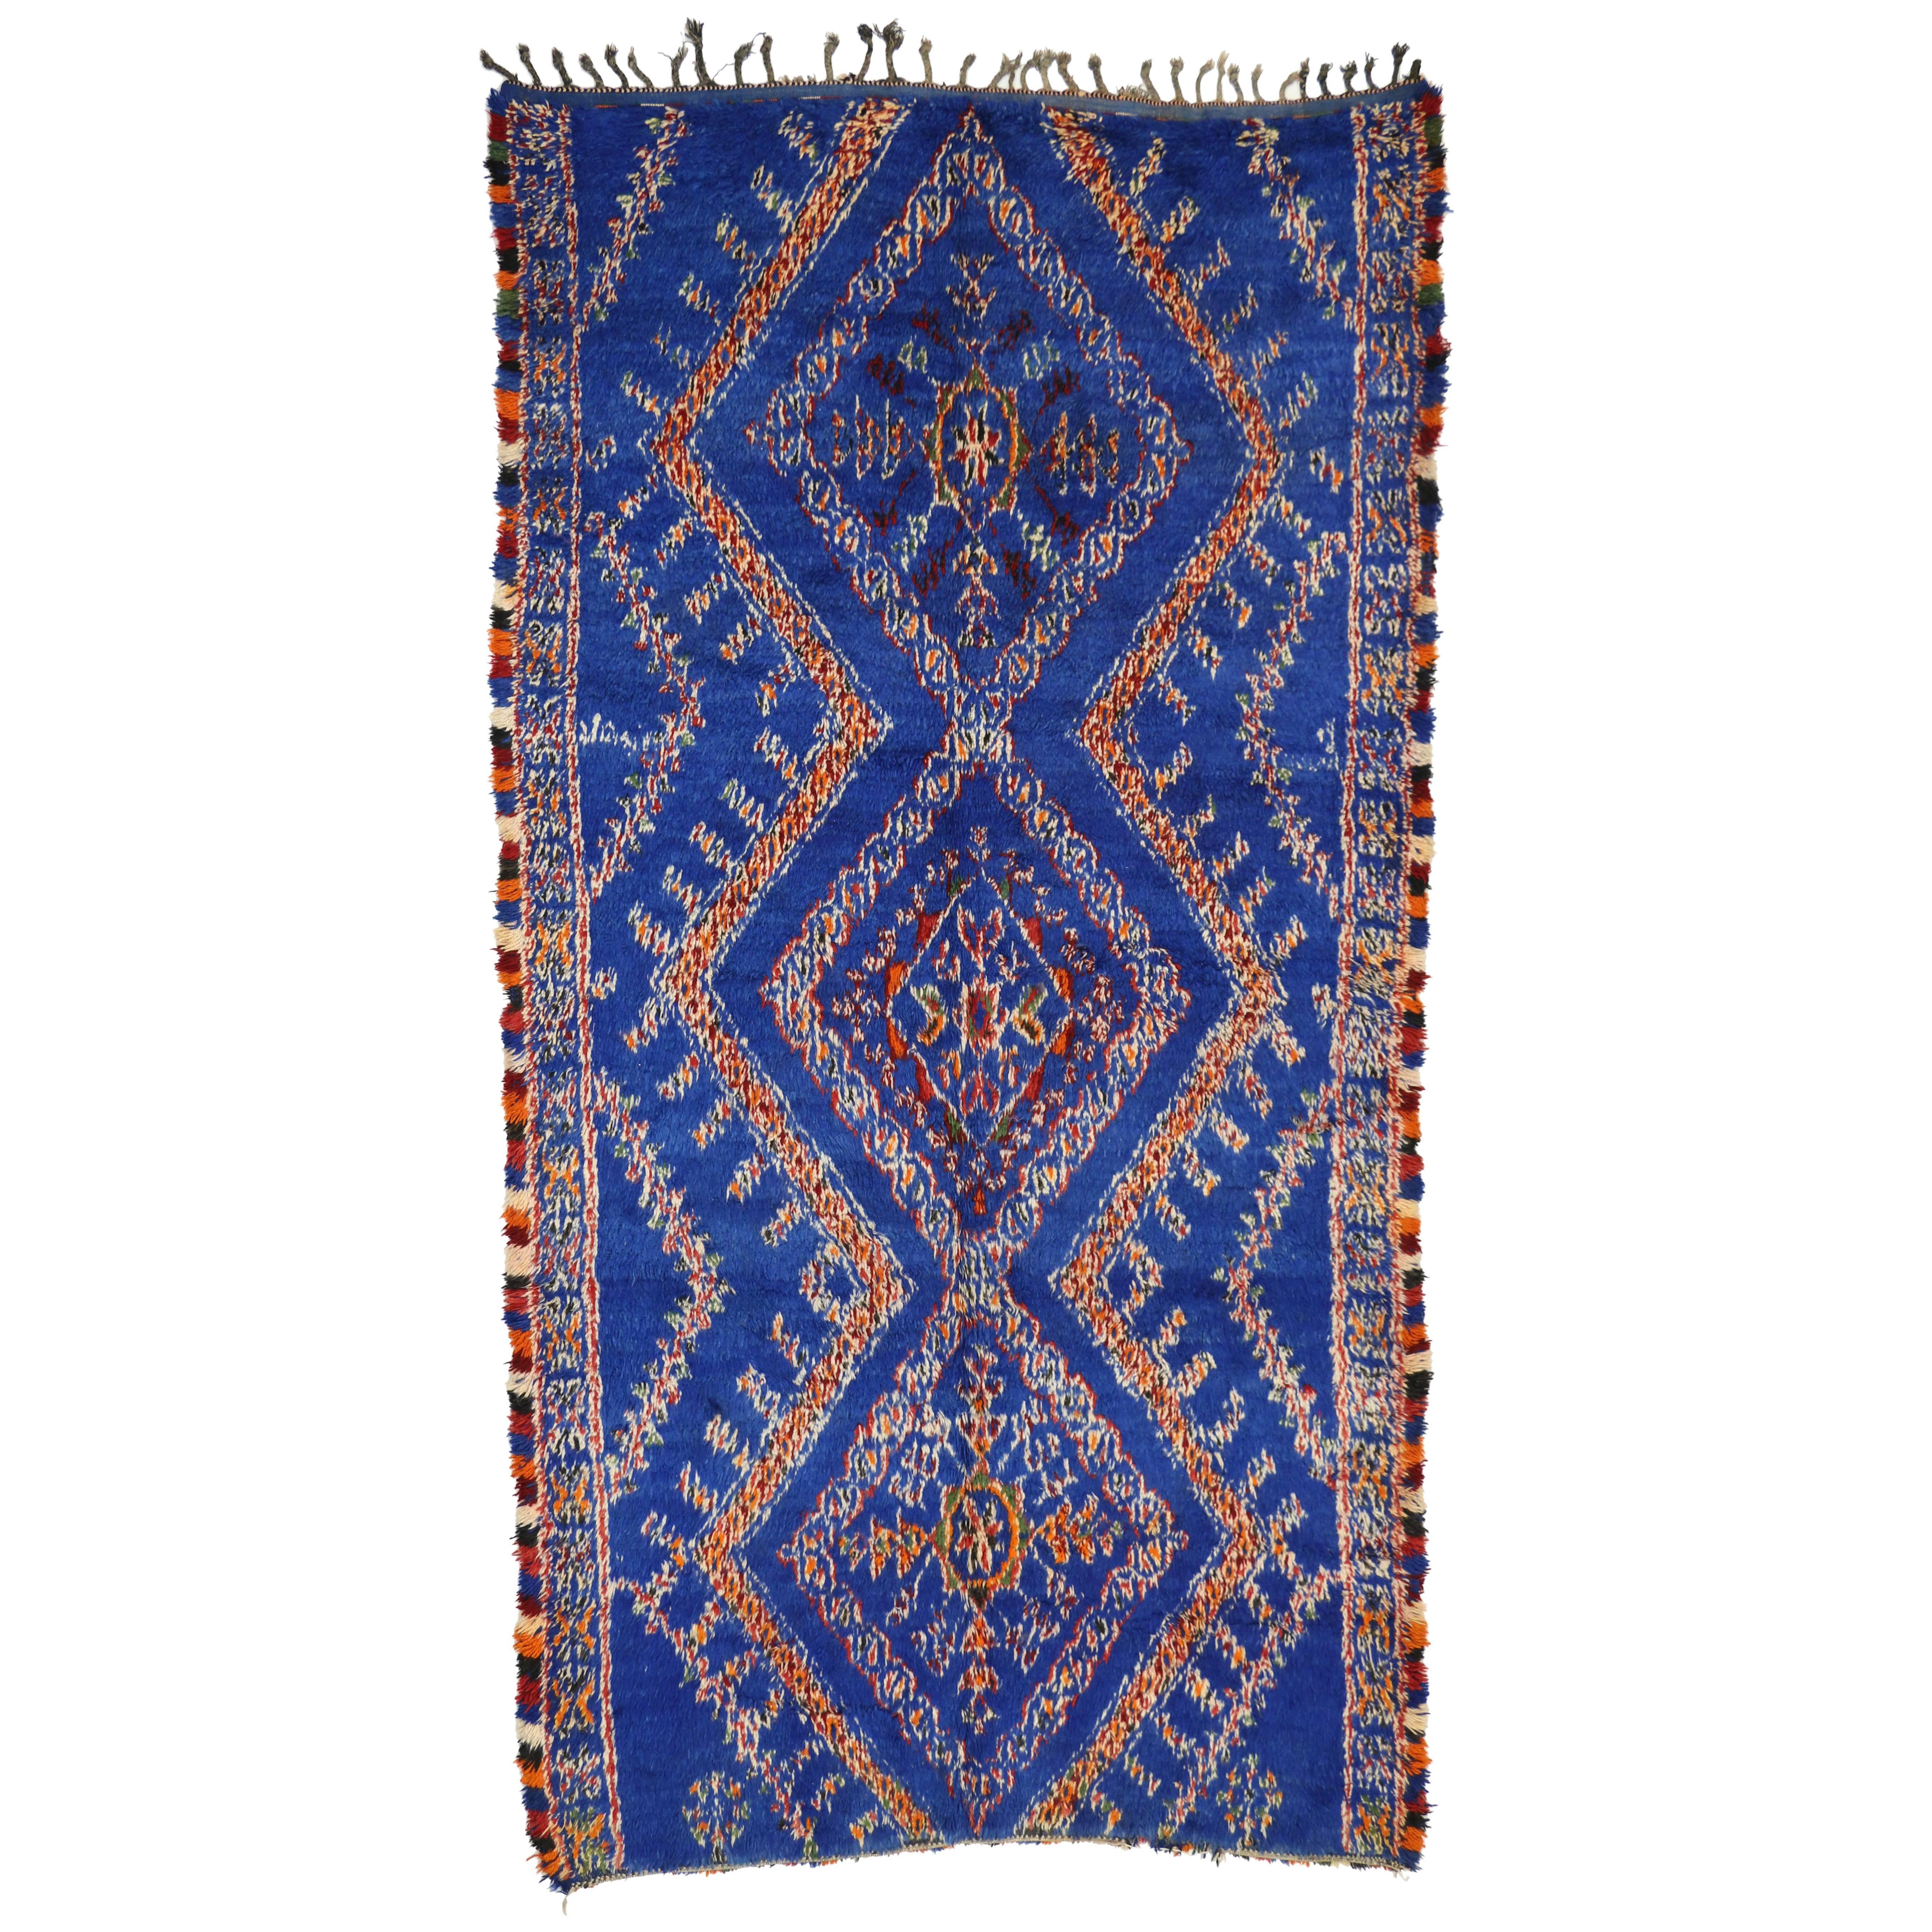 Blue Beni Ourain Moroccan Rug with Mid-Century Modern Style